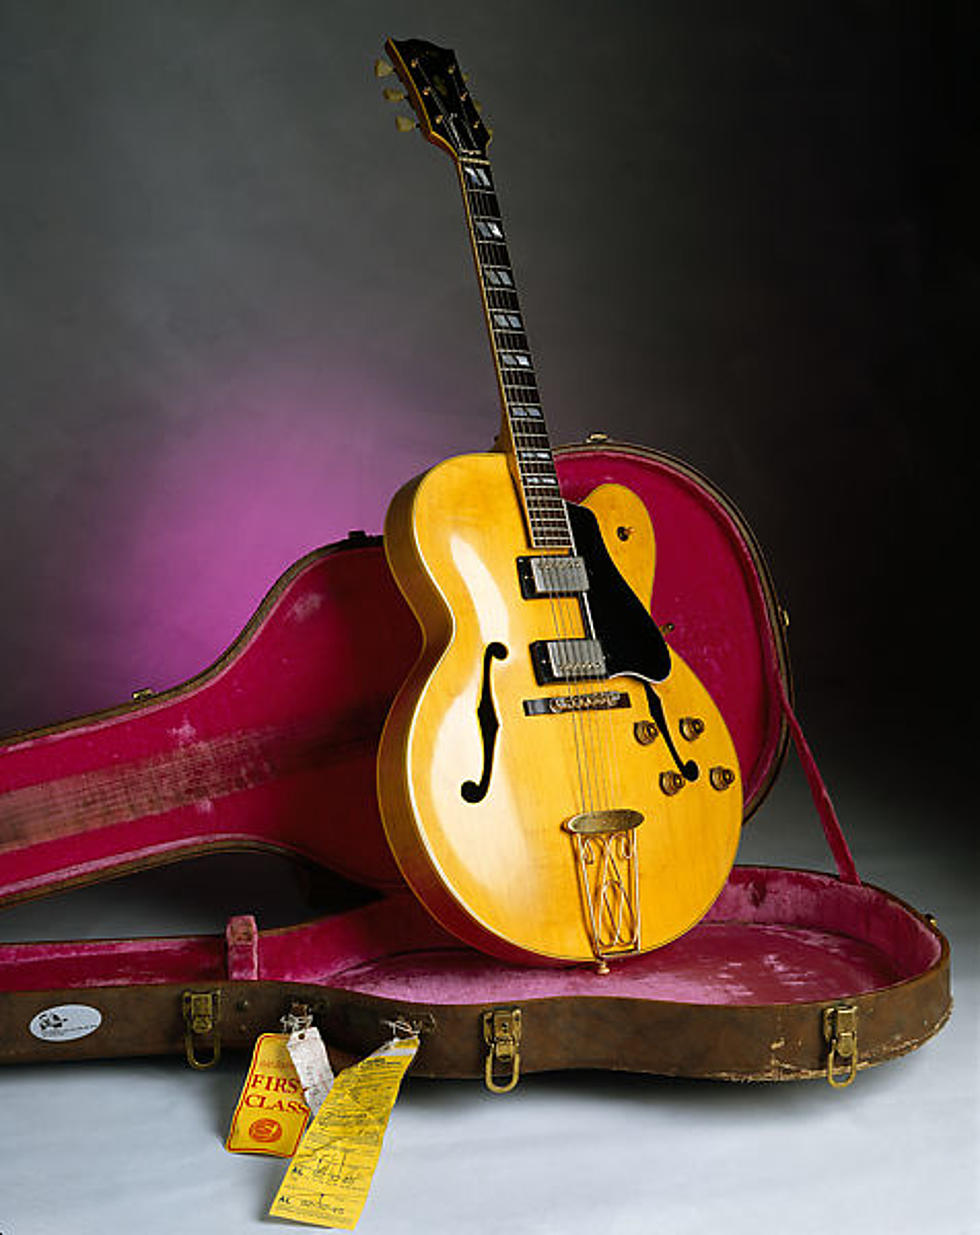 New Play it Loud Rock and Roll Instrument Exhibit Opens in NYC